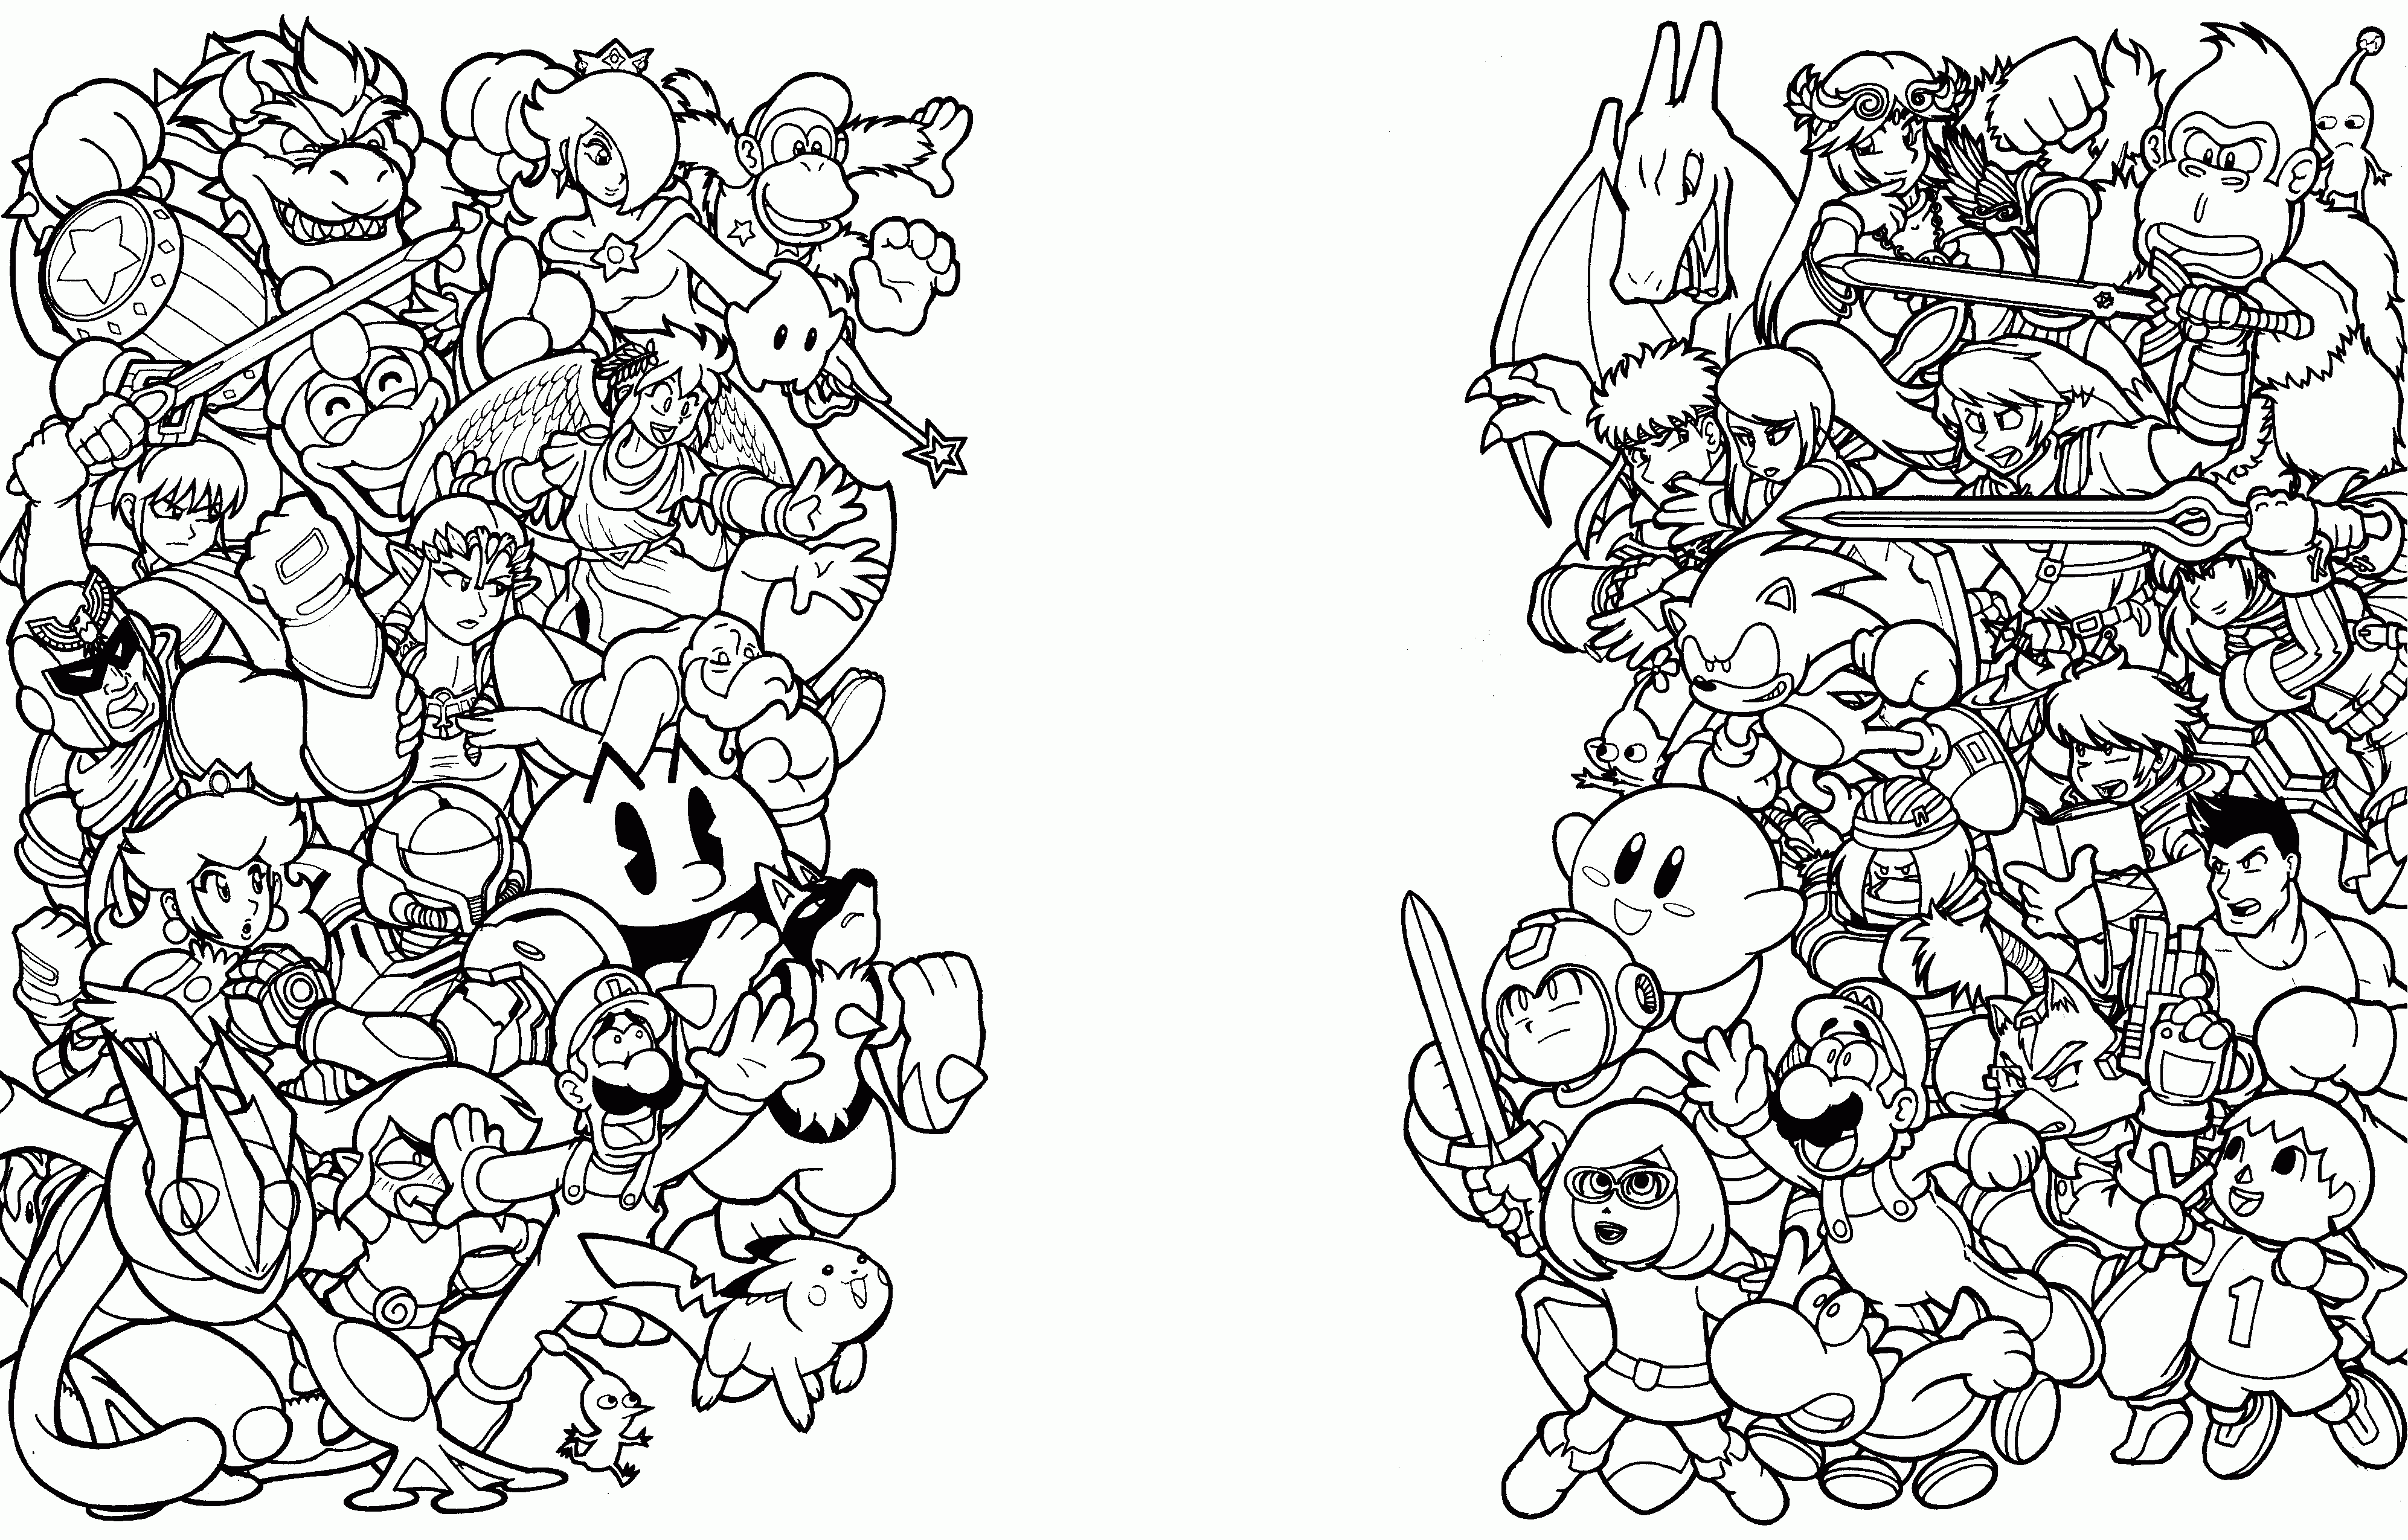 Super Smash Brothers Coloring Pages Free Printable - Coloring Home